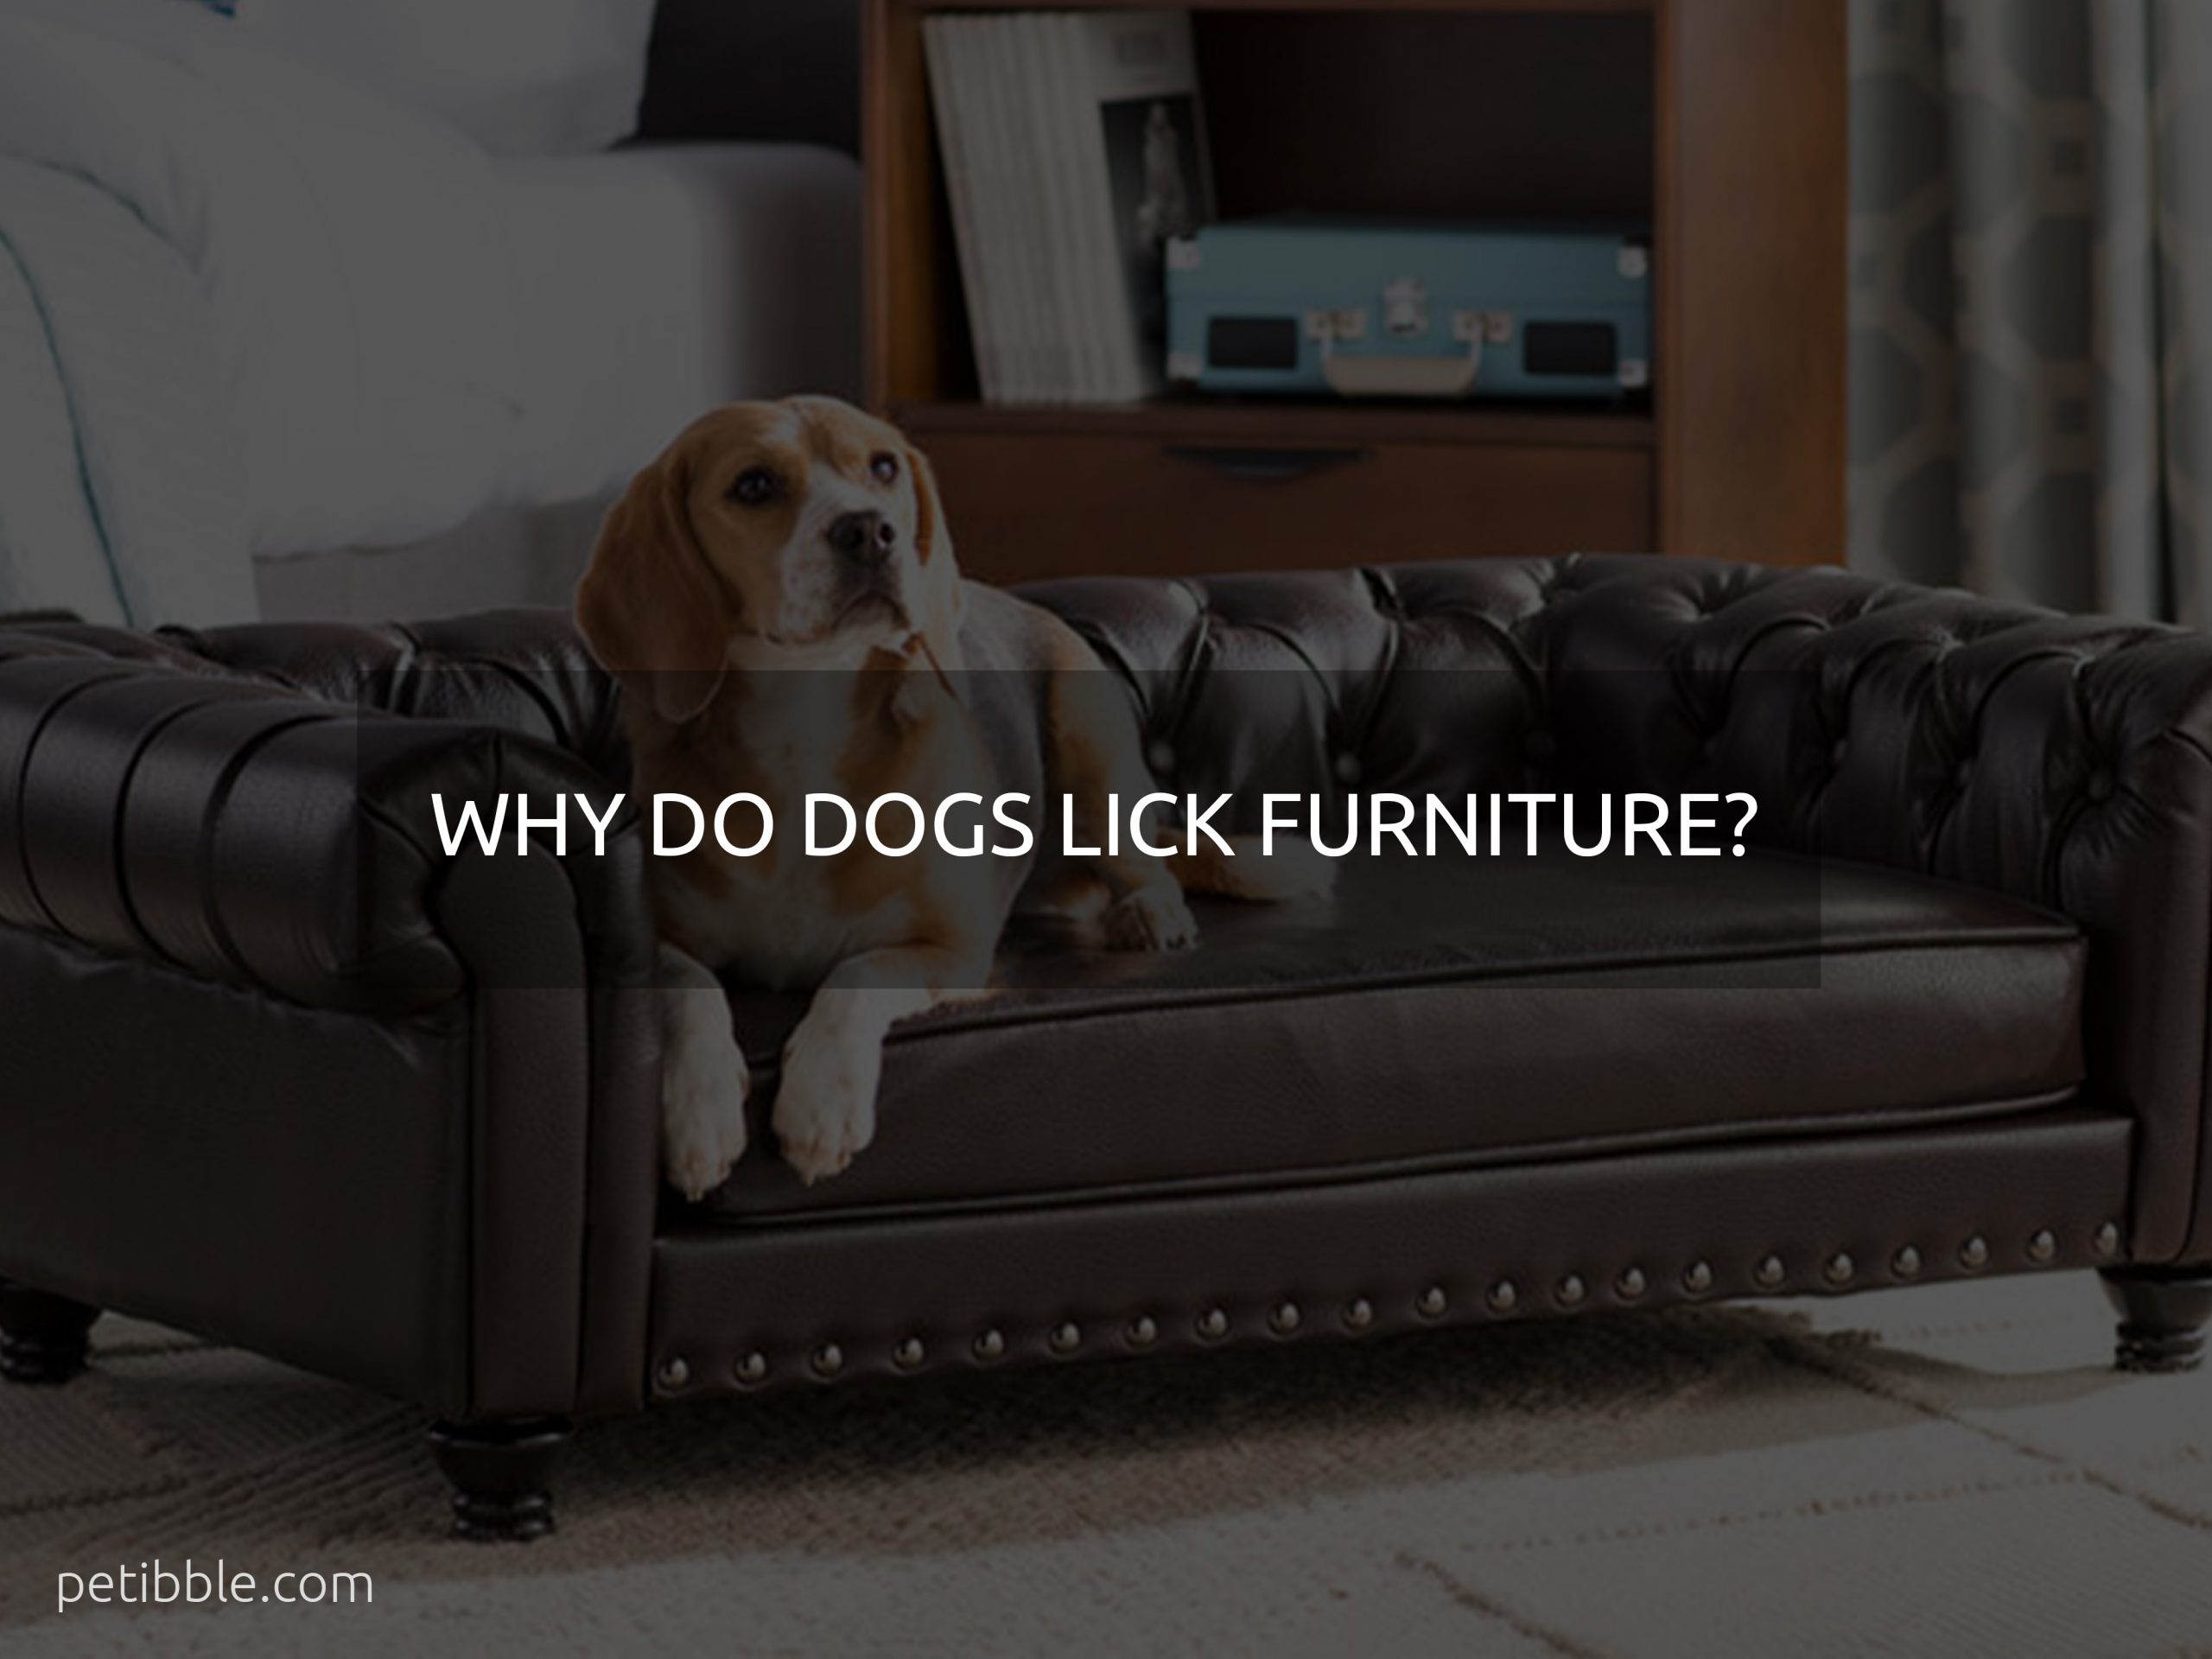 why do dogs lick furniture?